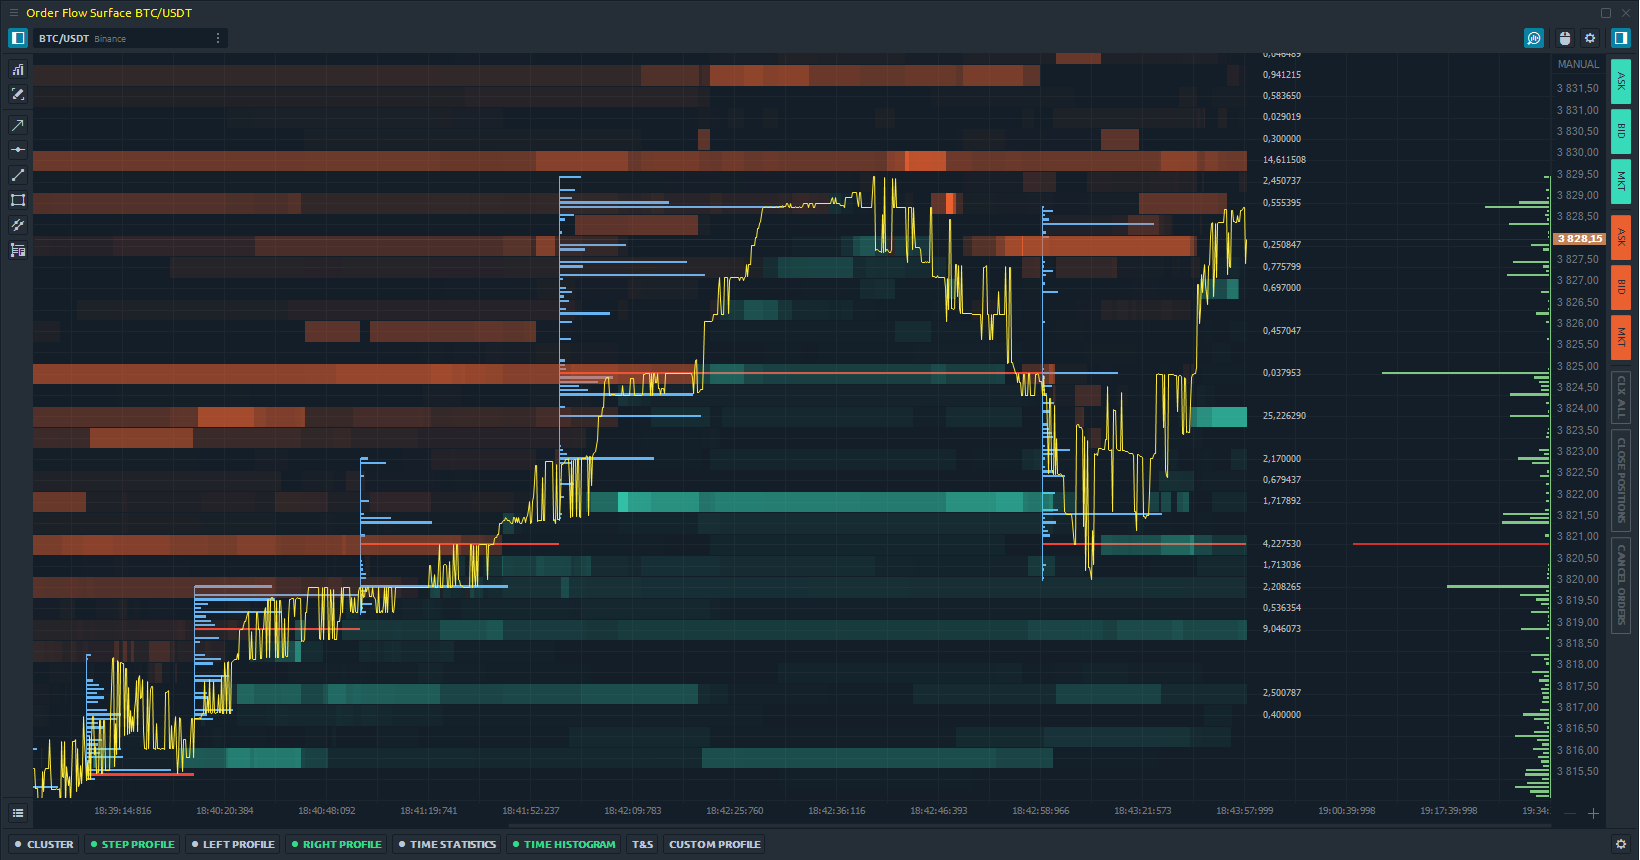 Added trading via Order Flow panel as well Volume analysis tools